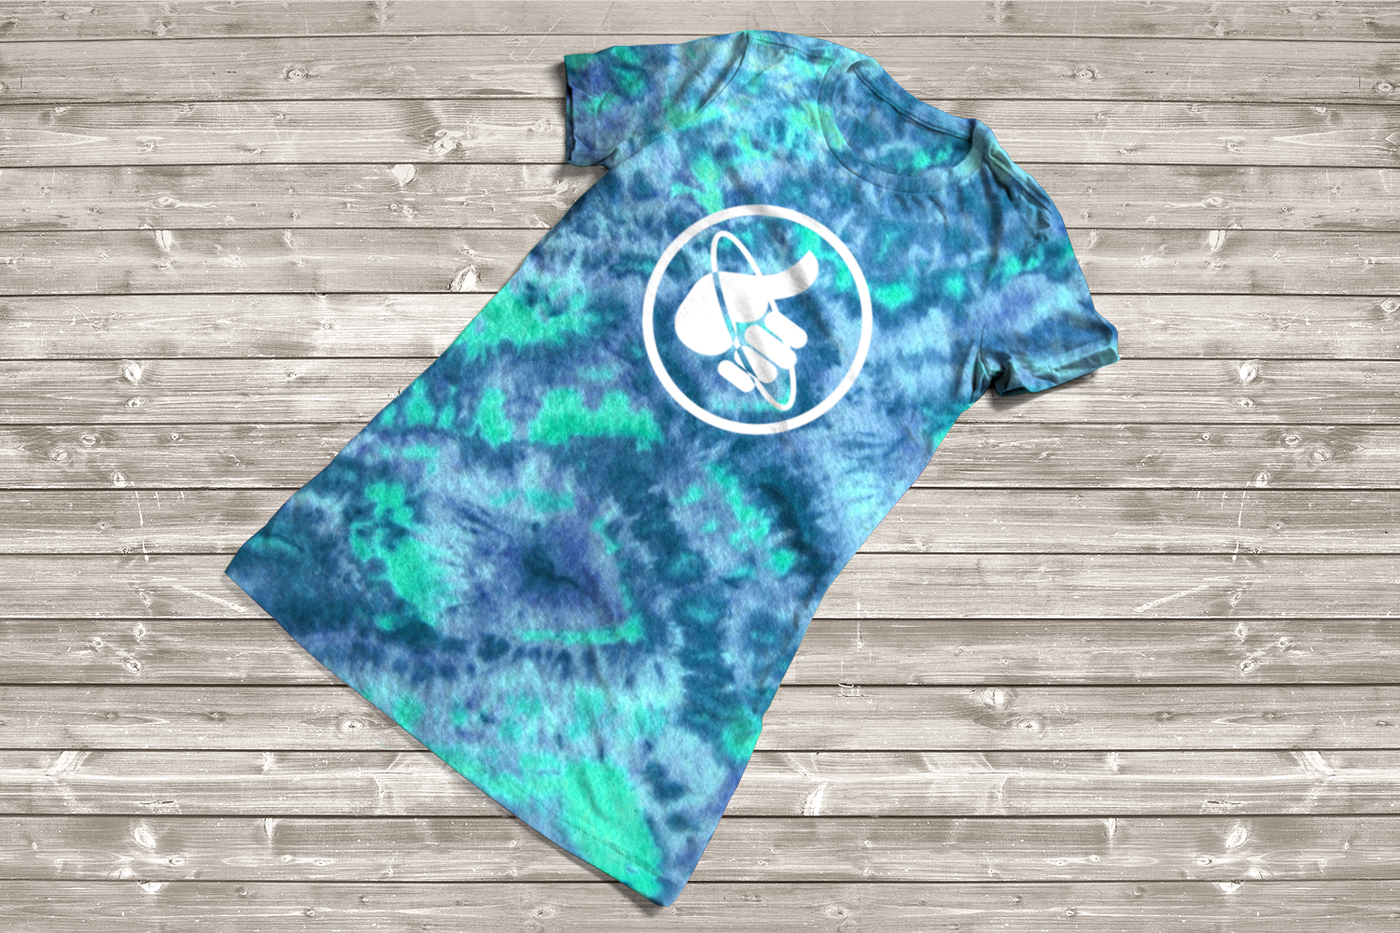 Tye-dyed tee with a thumb giving the hitchhiking gesture with a ring around it inside of a circle.